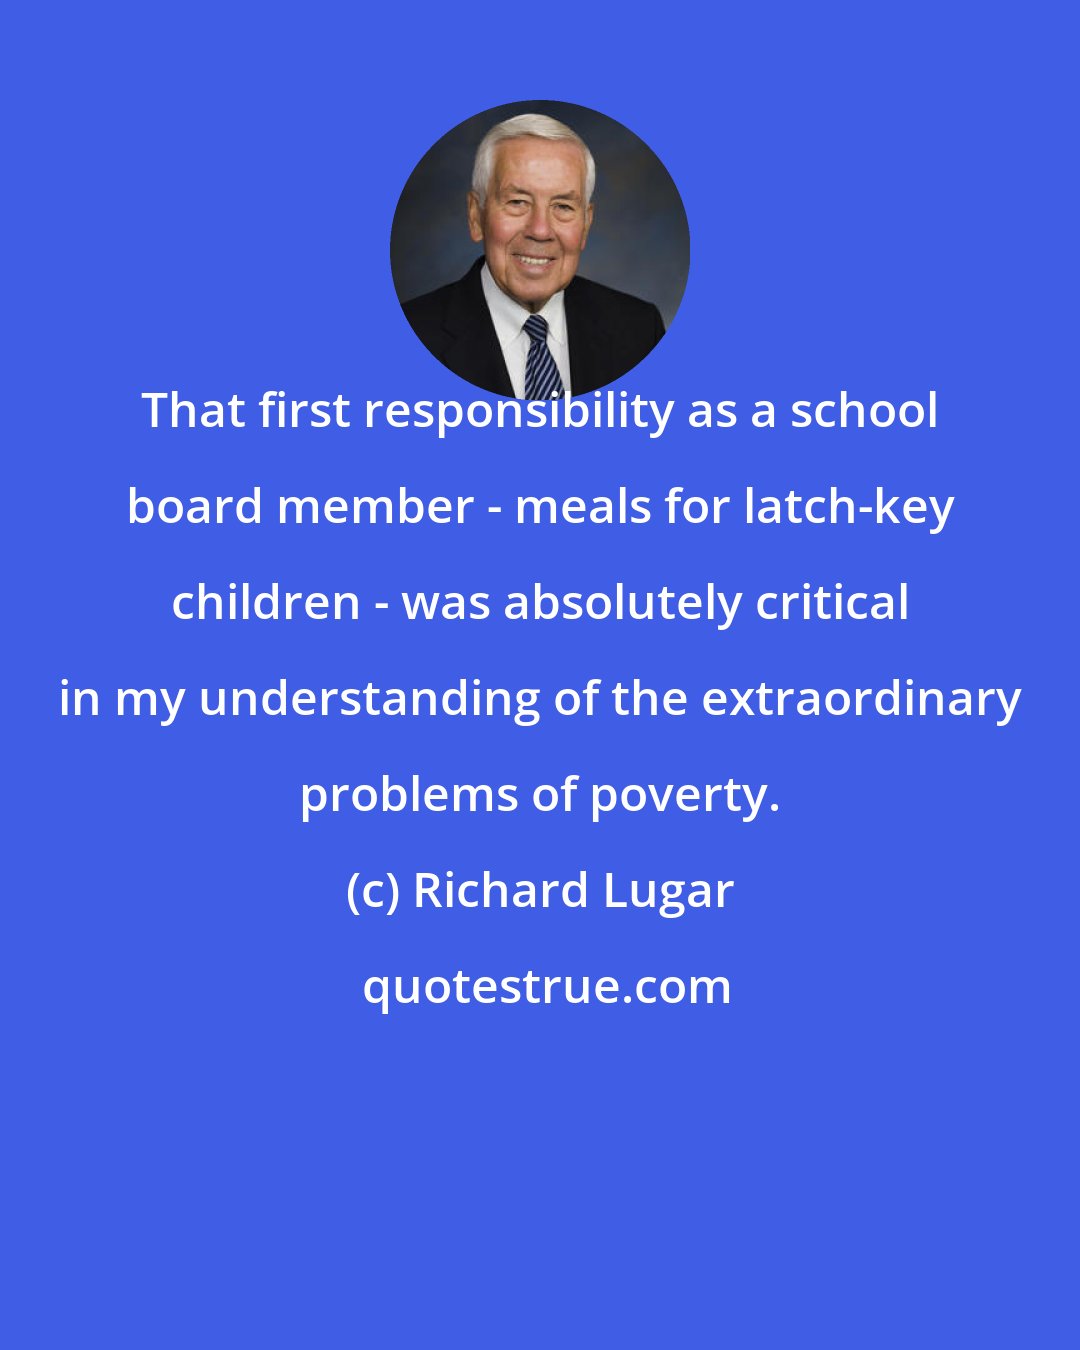 Richard Lugar: That first responsibility as a school board member - meals for latch-key children - was absolutely critical in my understanding of the extraordinary problems of poverty.